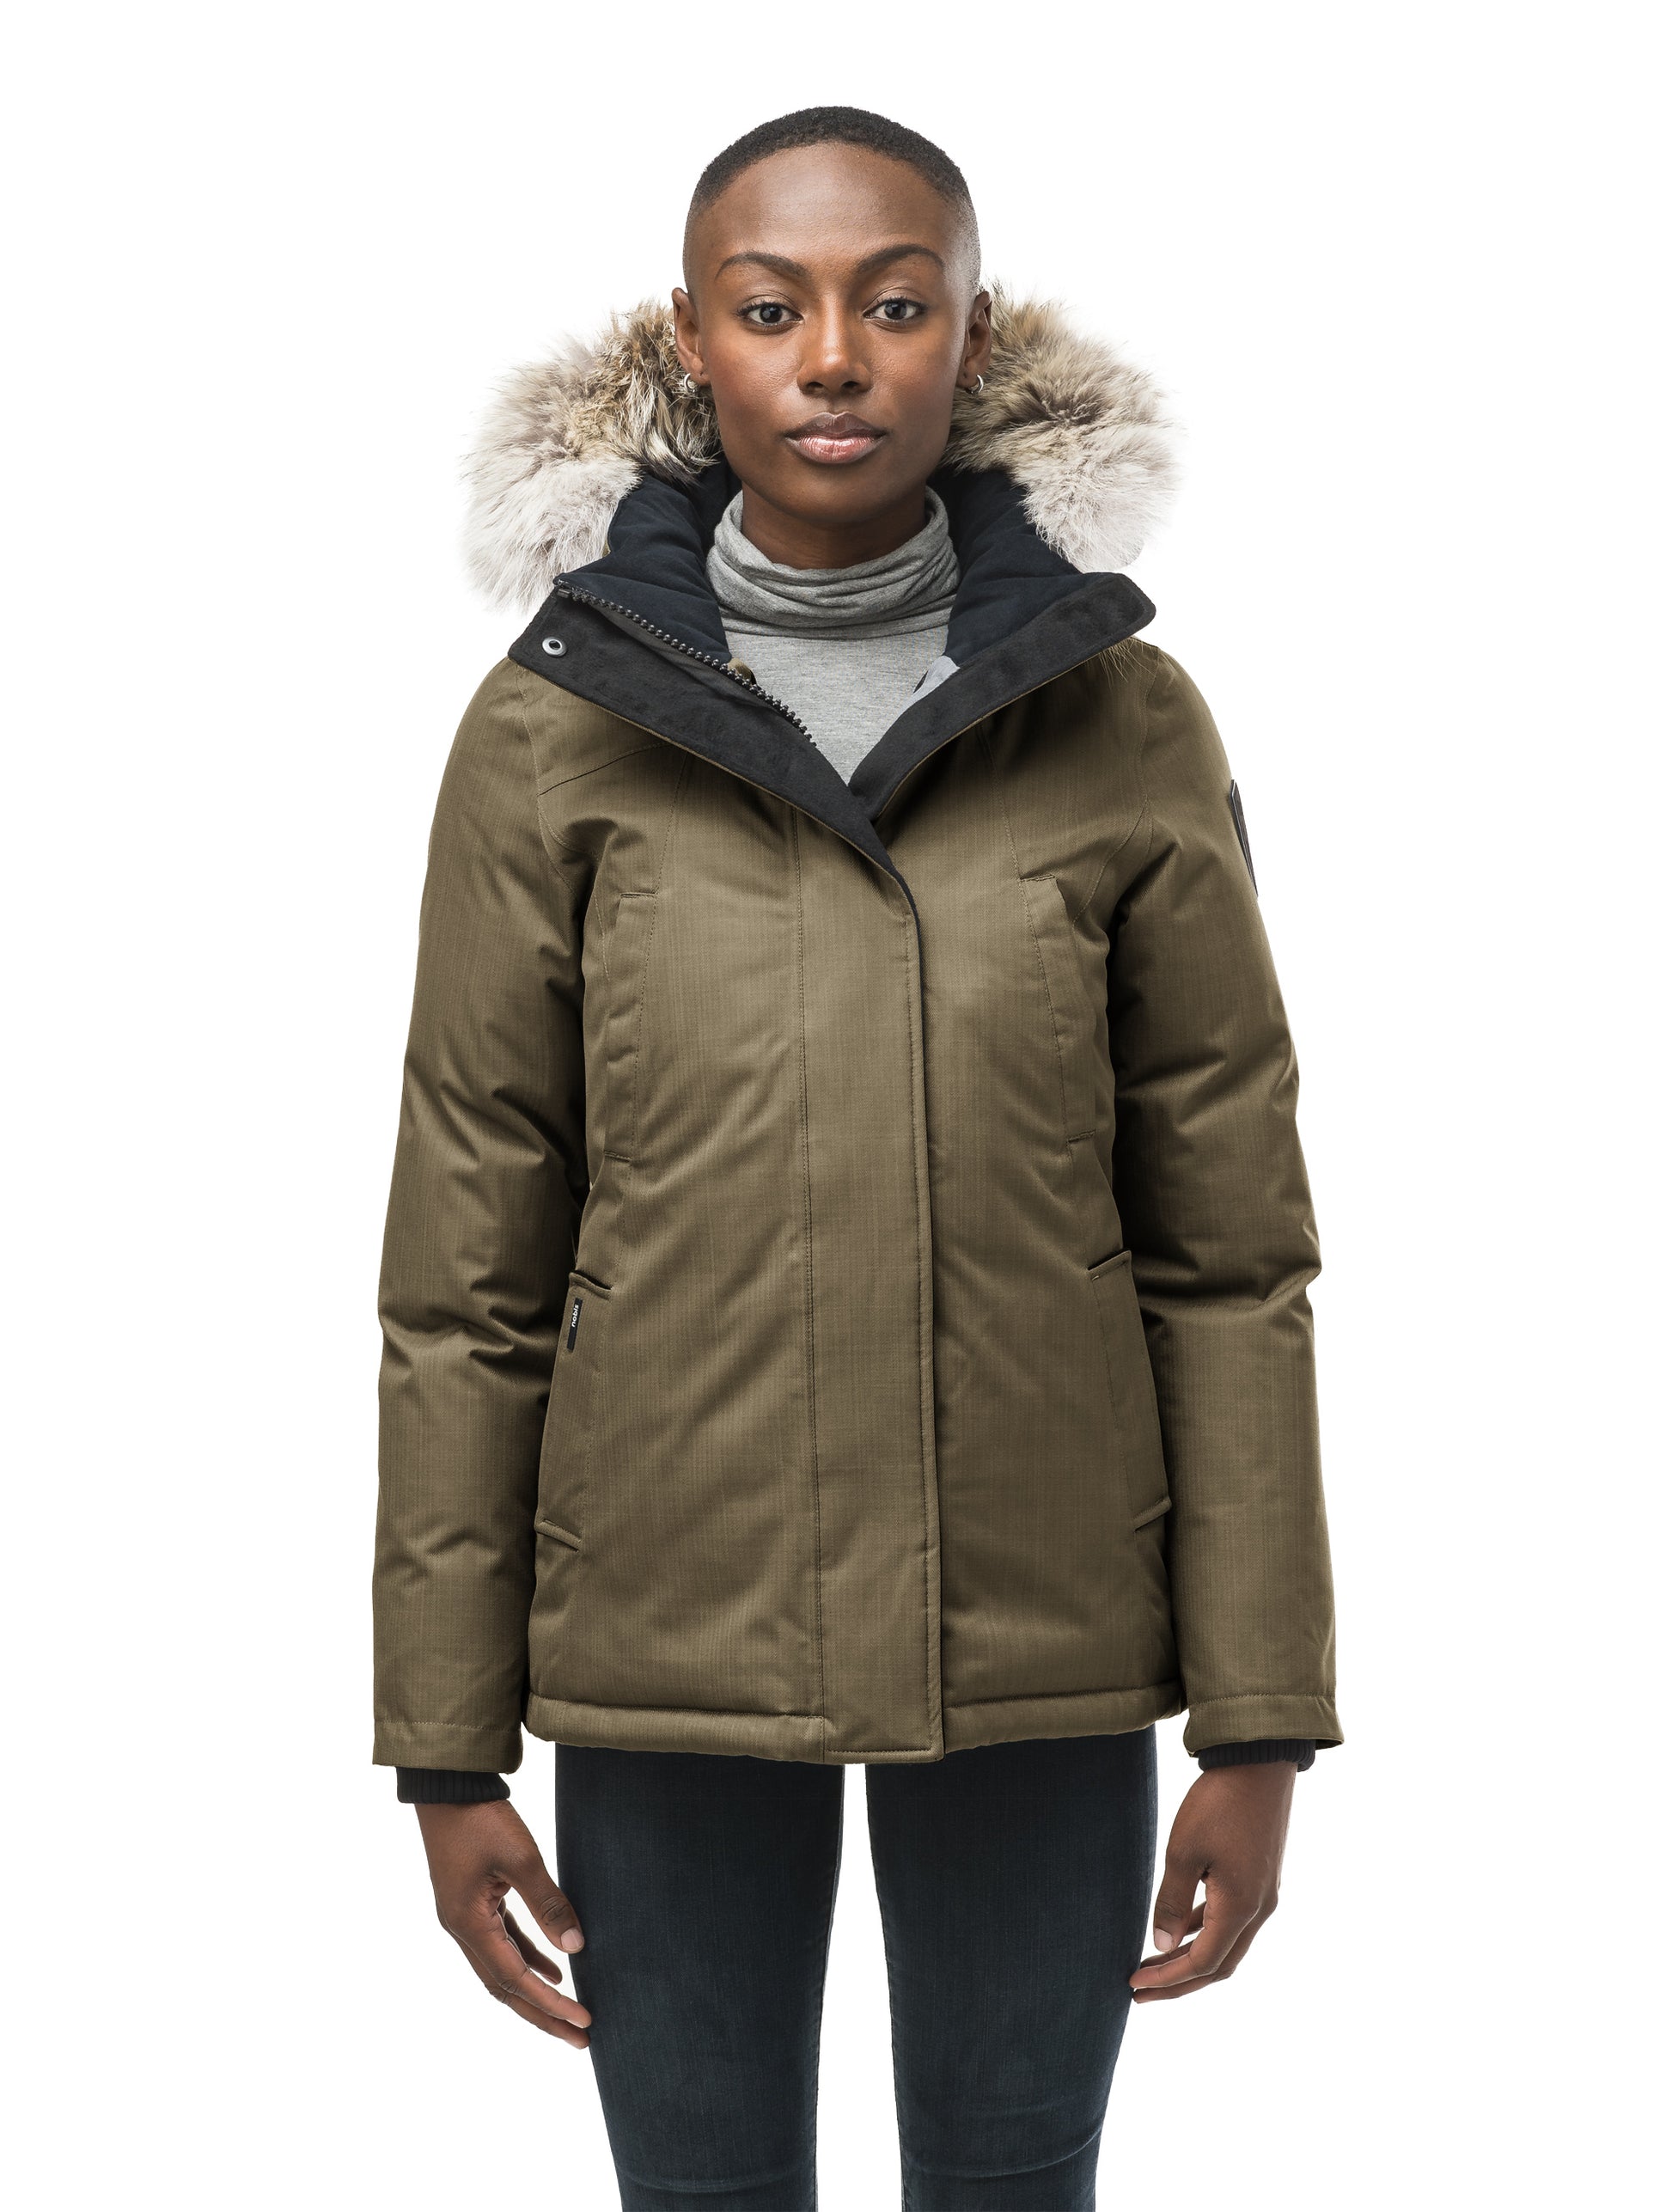 Women's hip length down filled parka in CH Fatigue